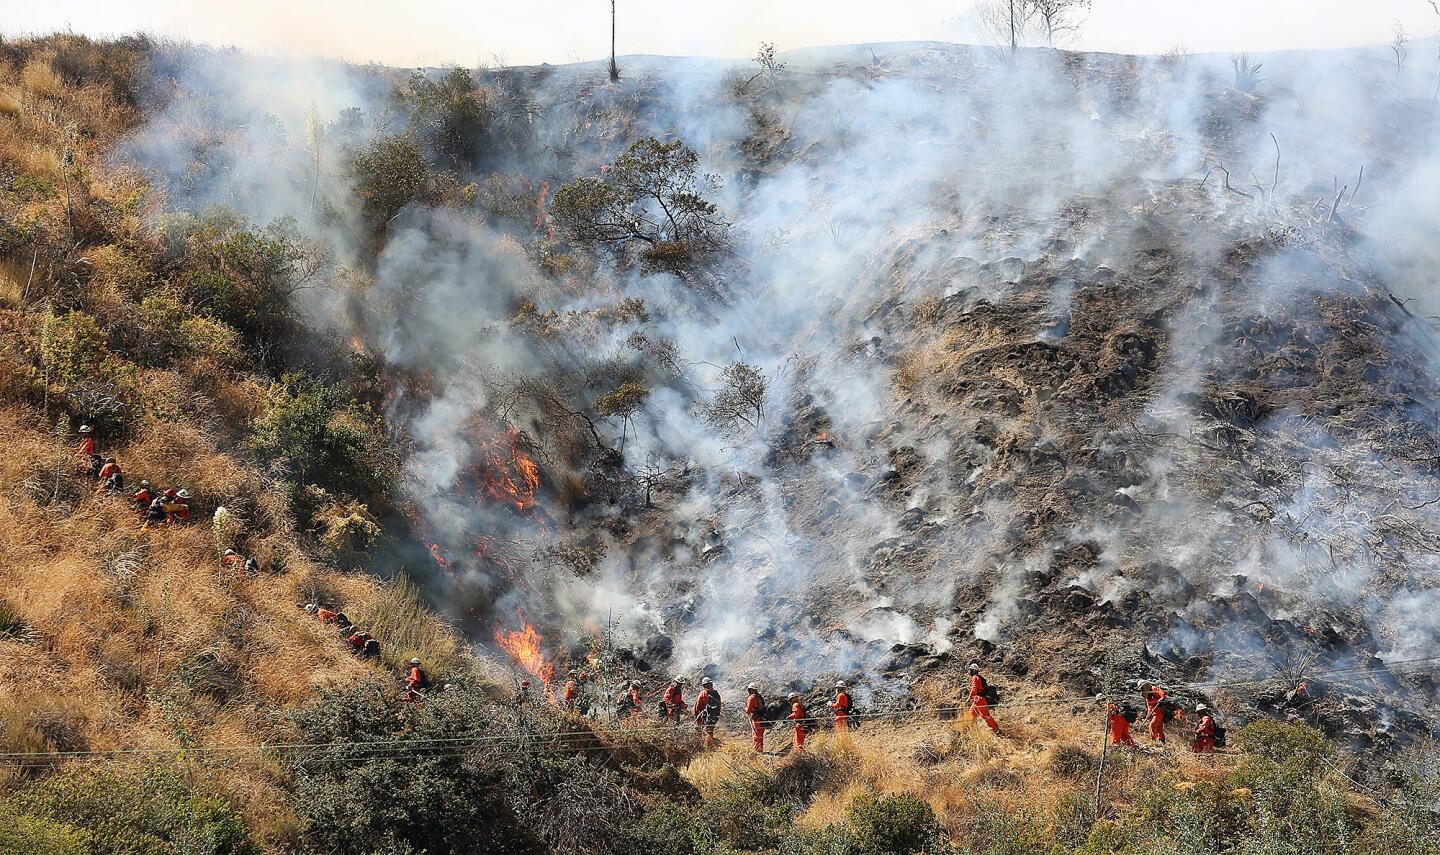 A fire crew cuts a fire line at the scene of a brush fire in the foothills above Hamline Place in Burbank on Wednesday, June 28, 2017. A third alarm was called to an address on Hamline, and Los Angeles County Fire, and the Los Angeles Fire Department helicopter attack crews dropped basket after basket of water onto the windblown flames. Few structures were threatened.